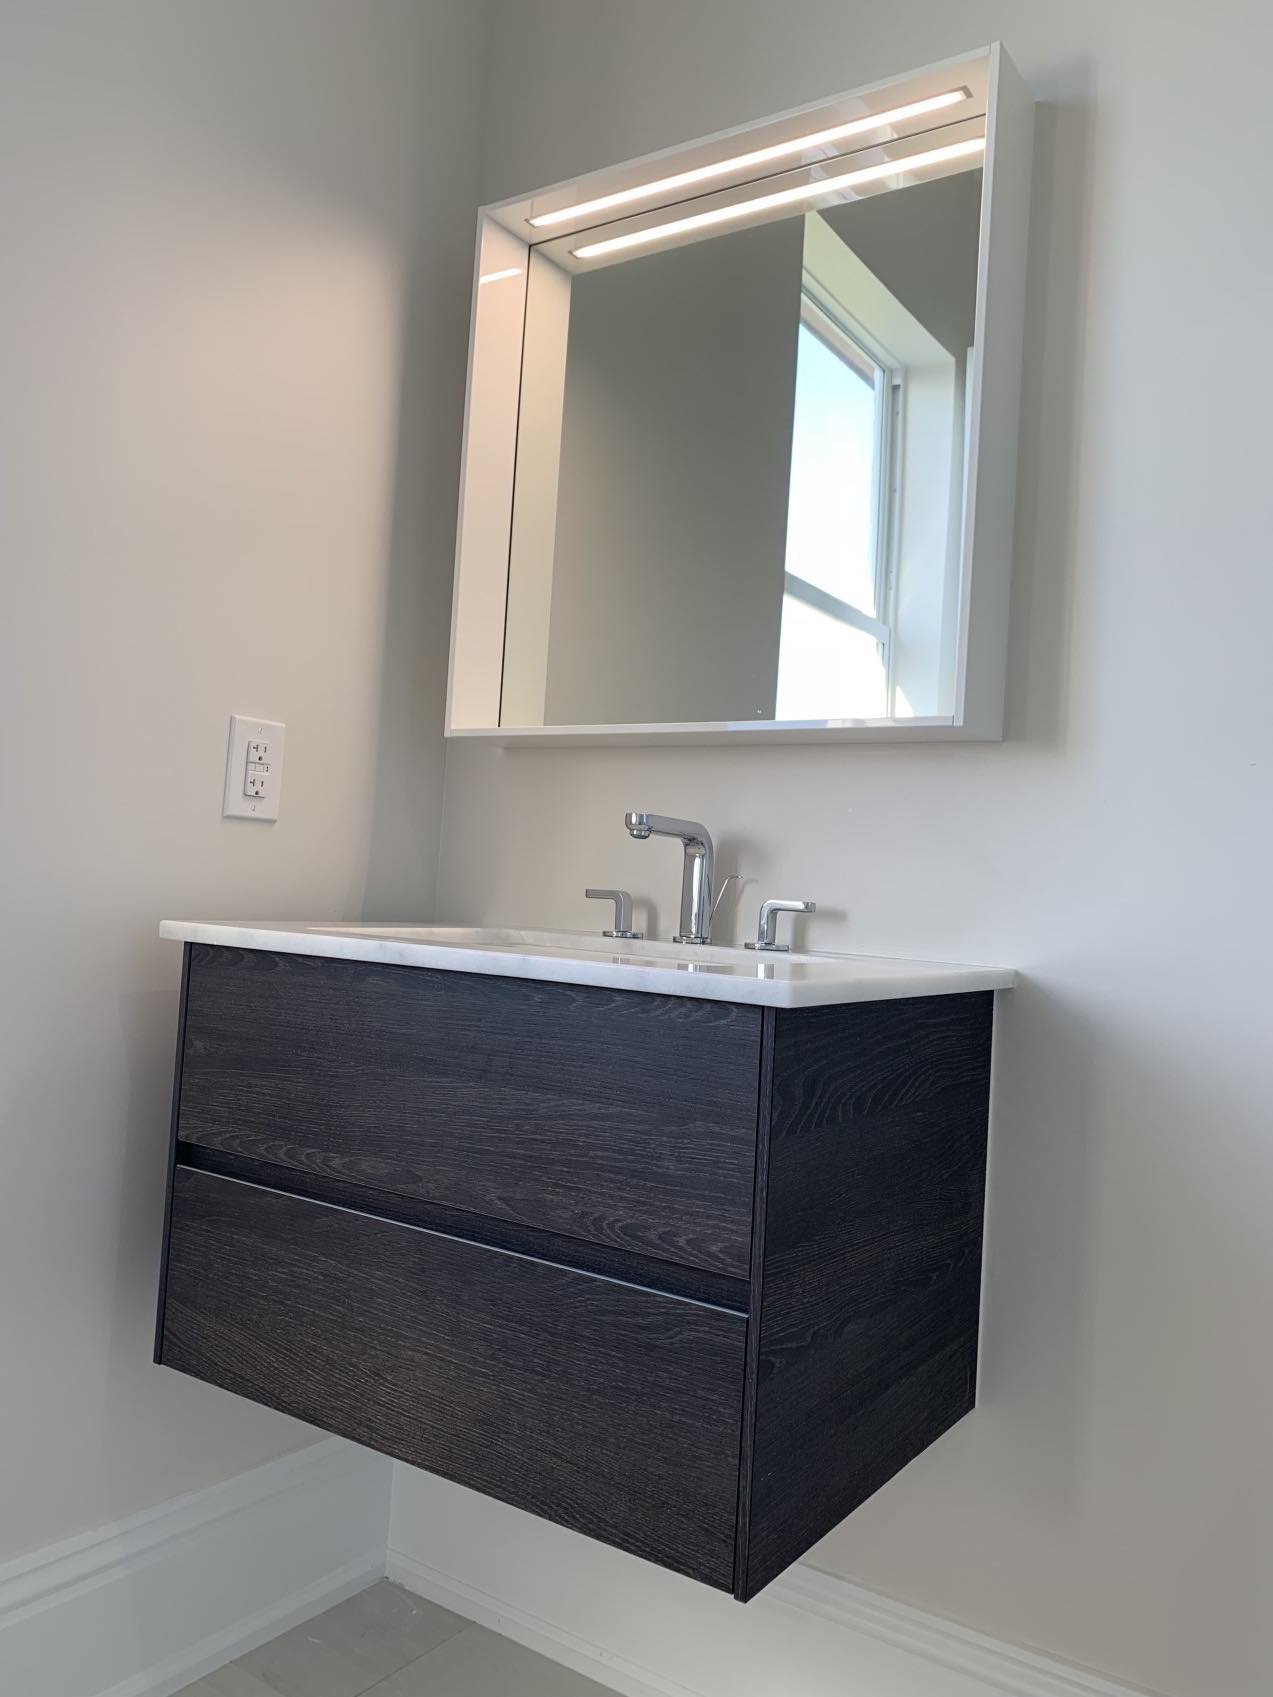 New floating vanity featuring modern mirror with built-in lighting